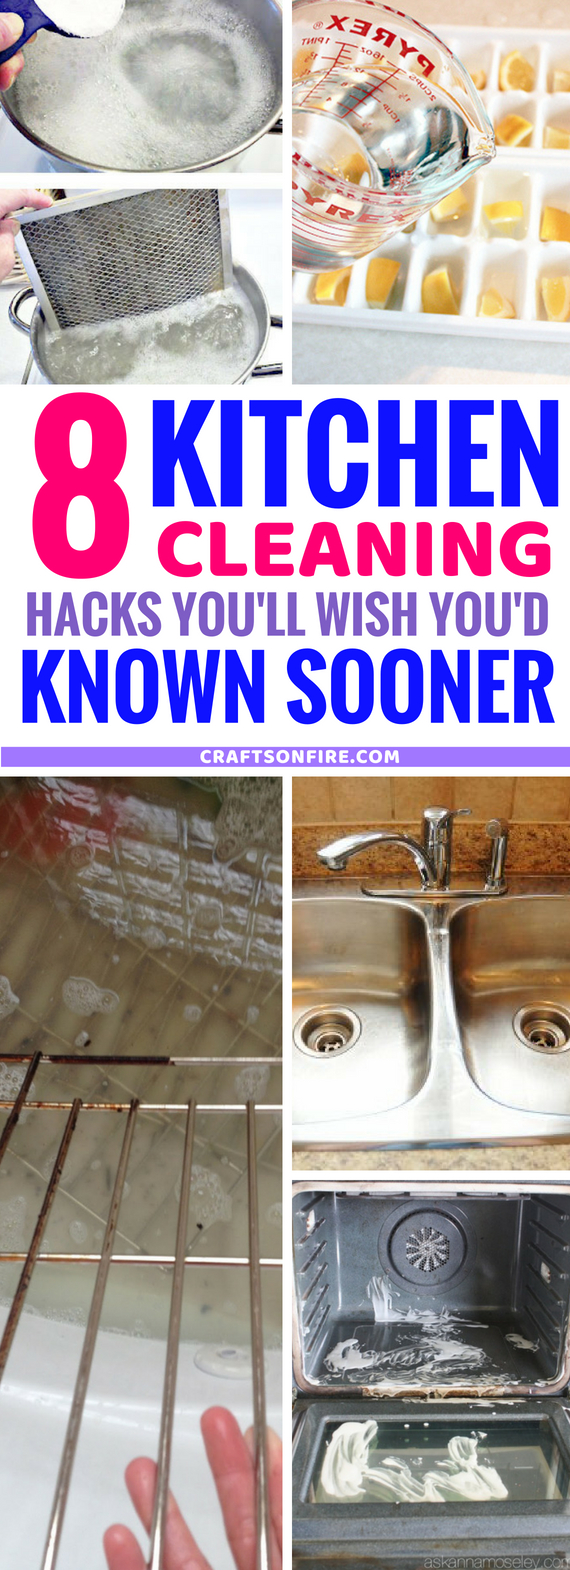 BEST kitchen cleaning tips and tricks that will solve ALL your problems. They actually work really well! You'll find easy solutions to get rid of stains, clean the dirty things in your kitchen within minutes and finally get rid of those stains from pots and pans. Trust me when I say these kitchen cleaning hacks are GENIUS! 